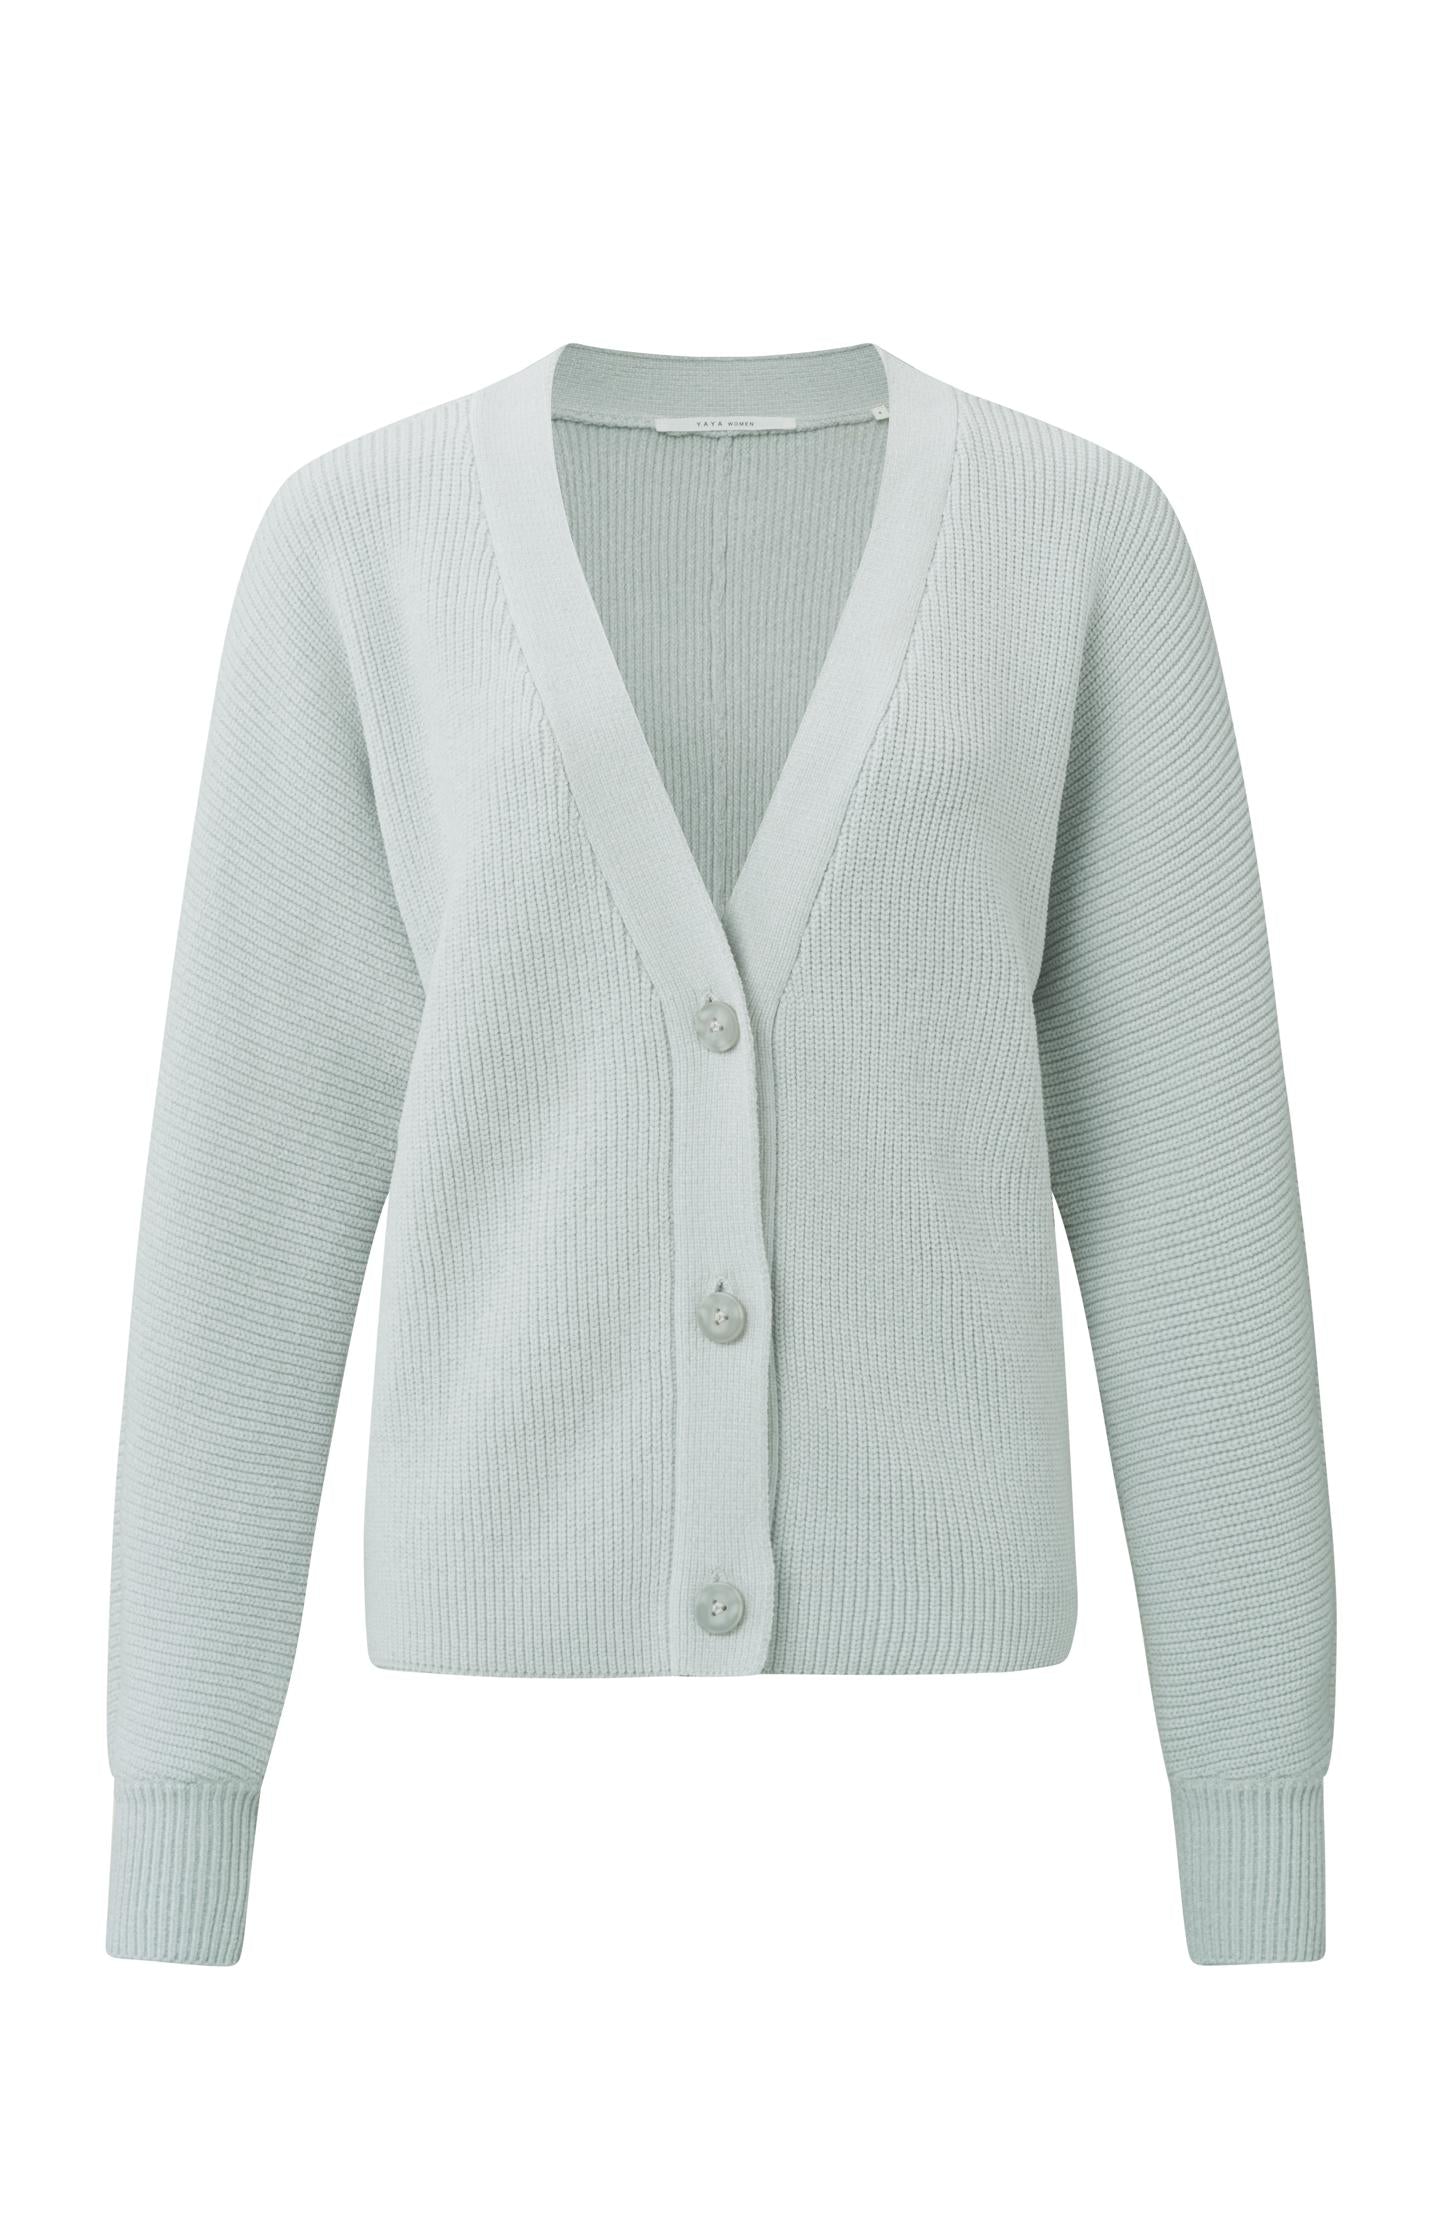 Chenille cardigan with V-neck, long sleeves and buttons - Type: product